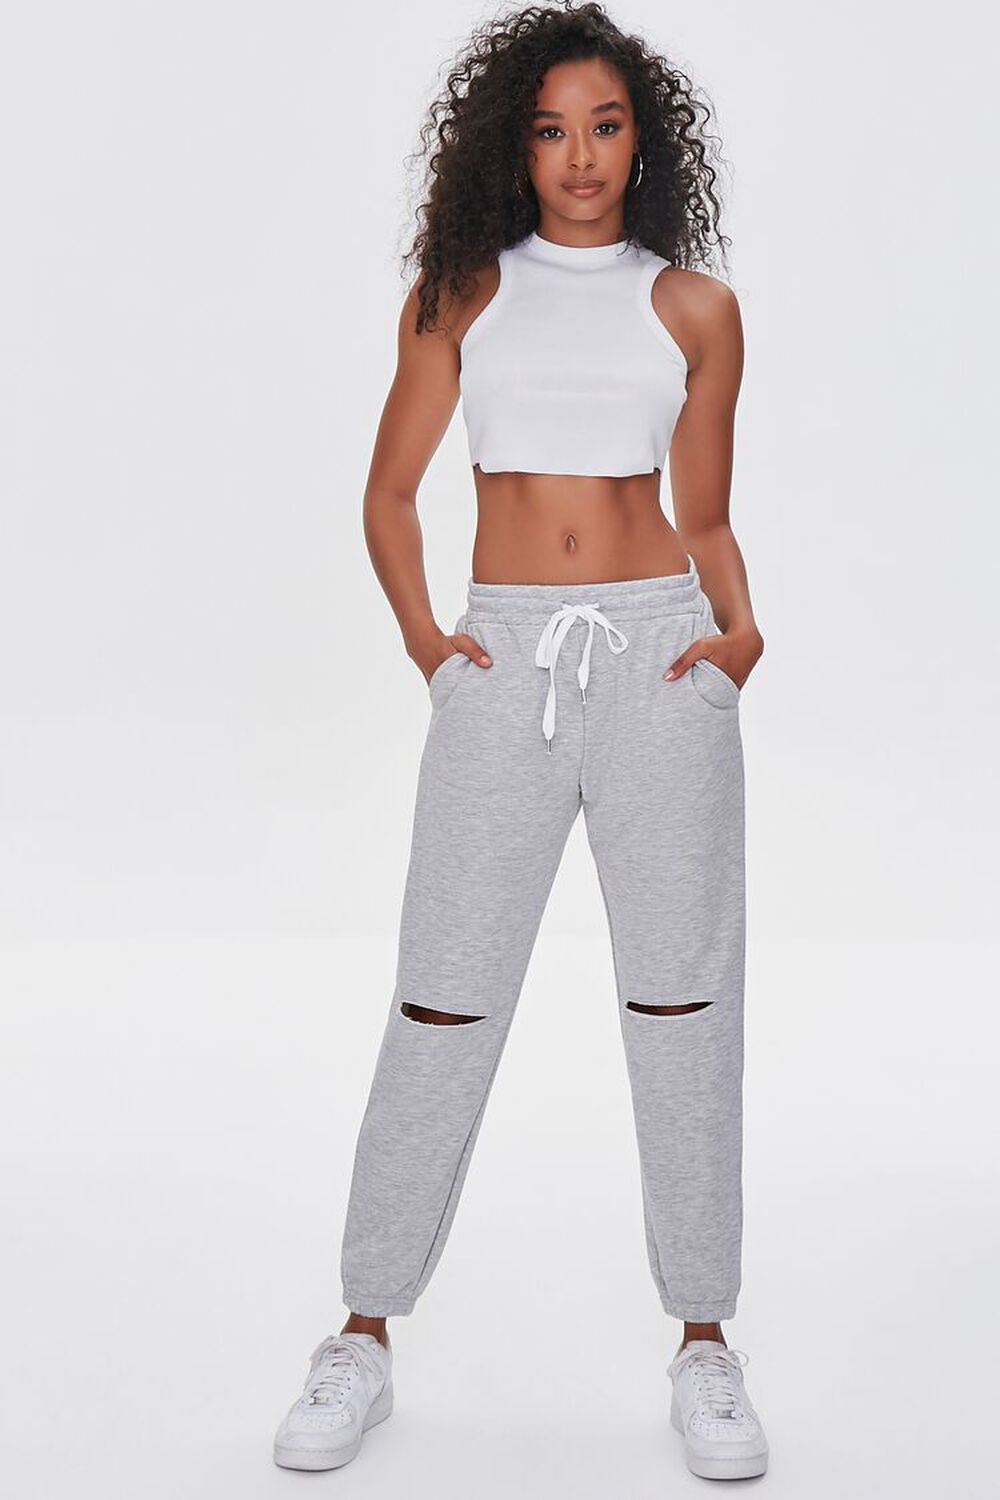 HEATHER GREY Distressed French Terry Joggers, image 1